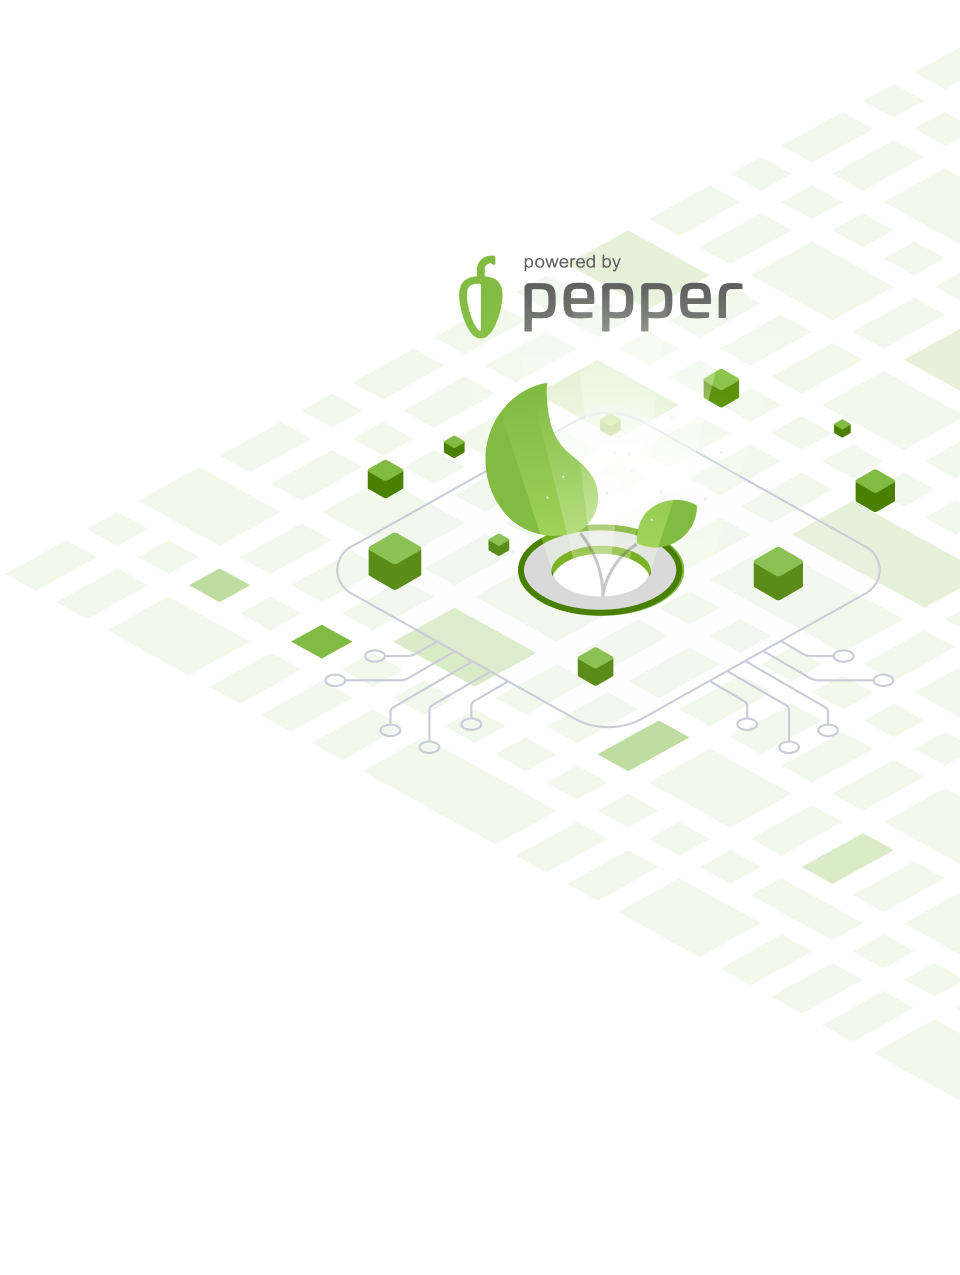 Powered by Pepper